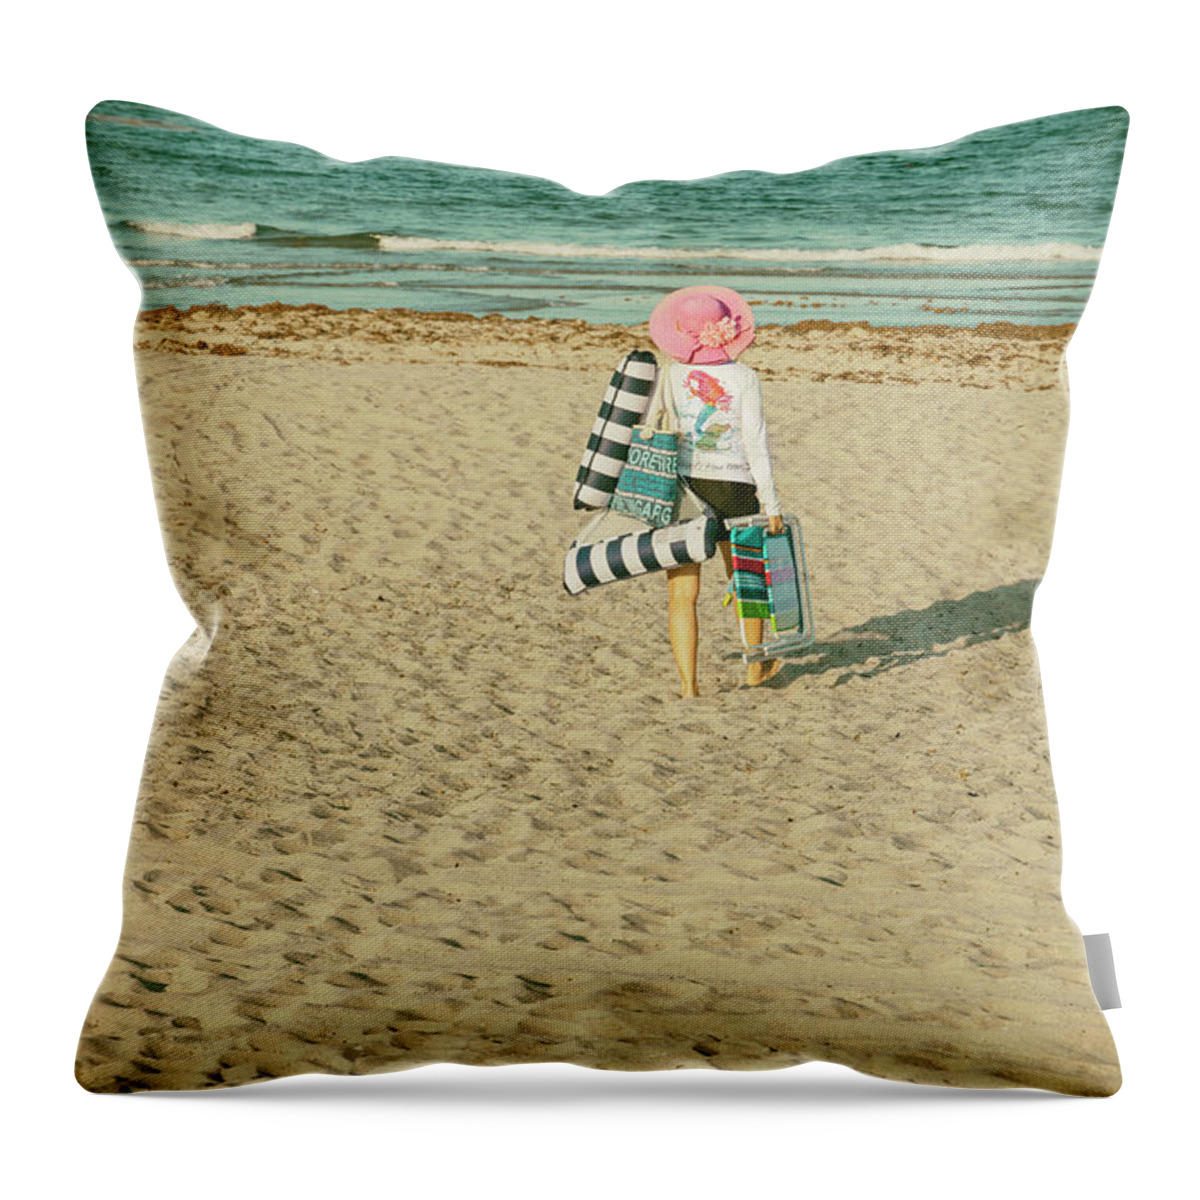 Estock Throw Pillow featuring the digital art Woman On Vacation Walking On The Beach by Laura Diez